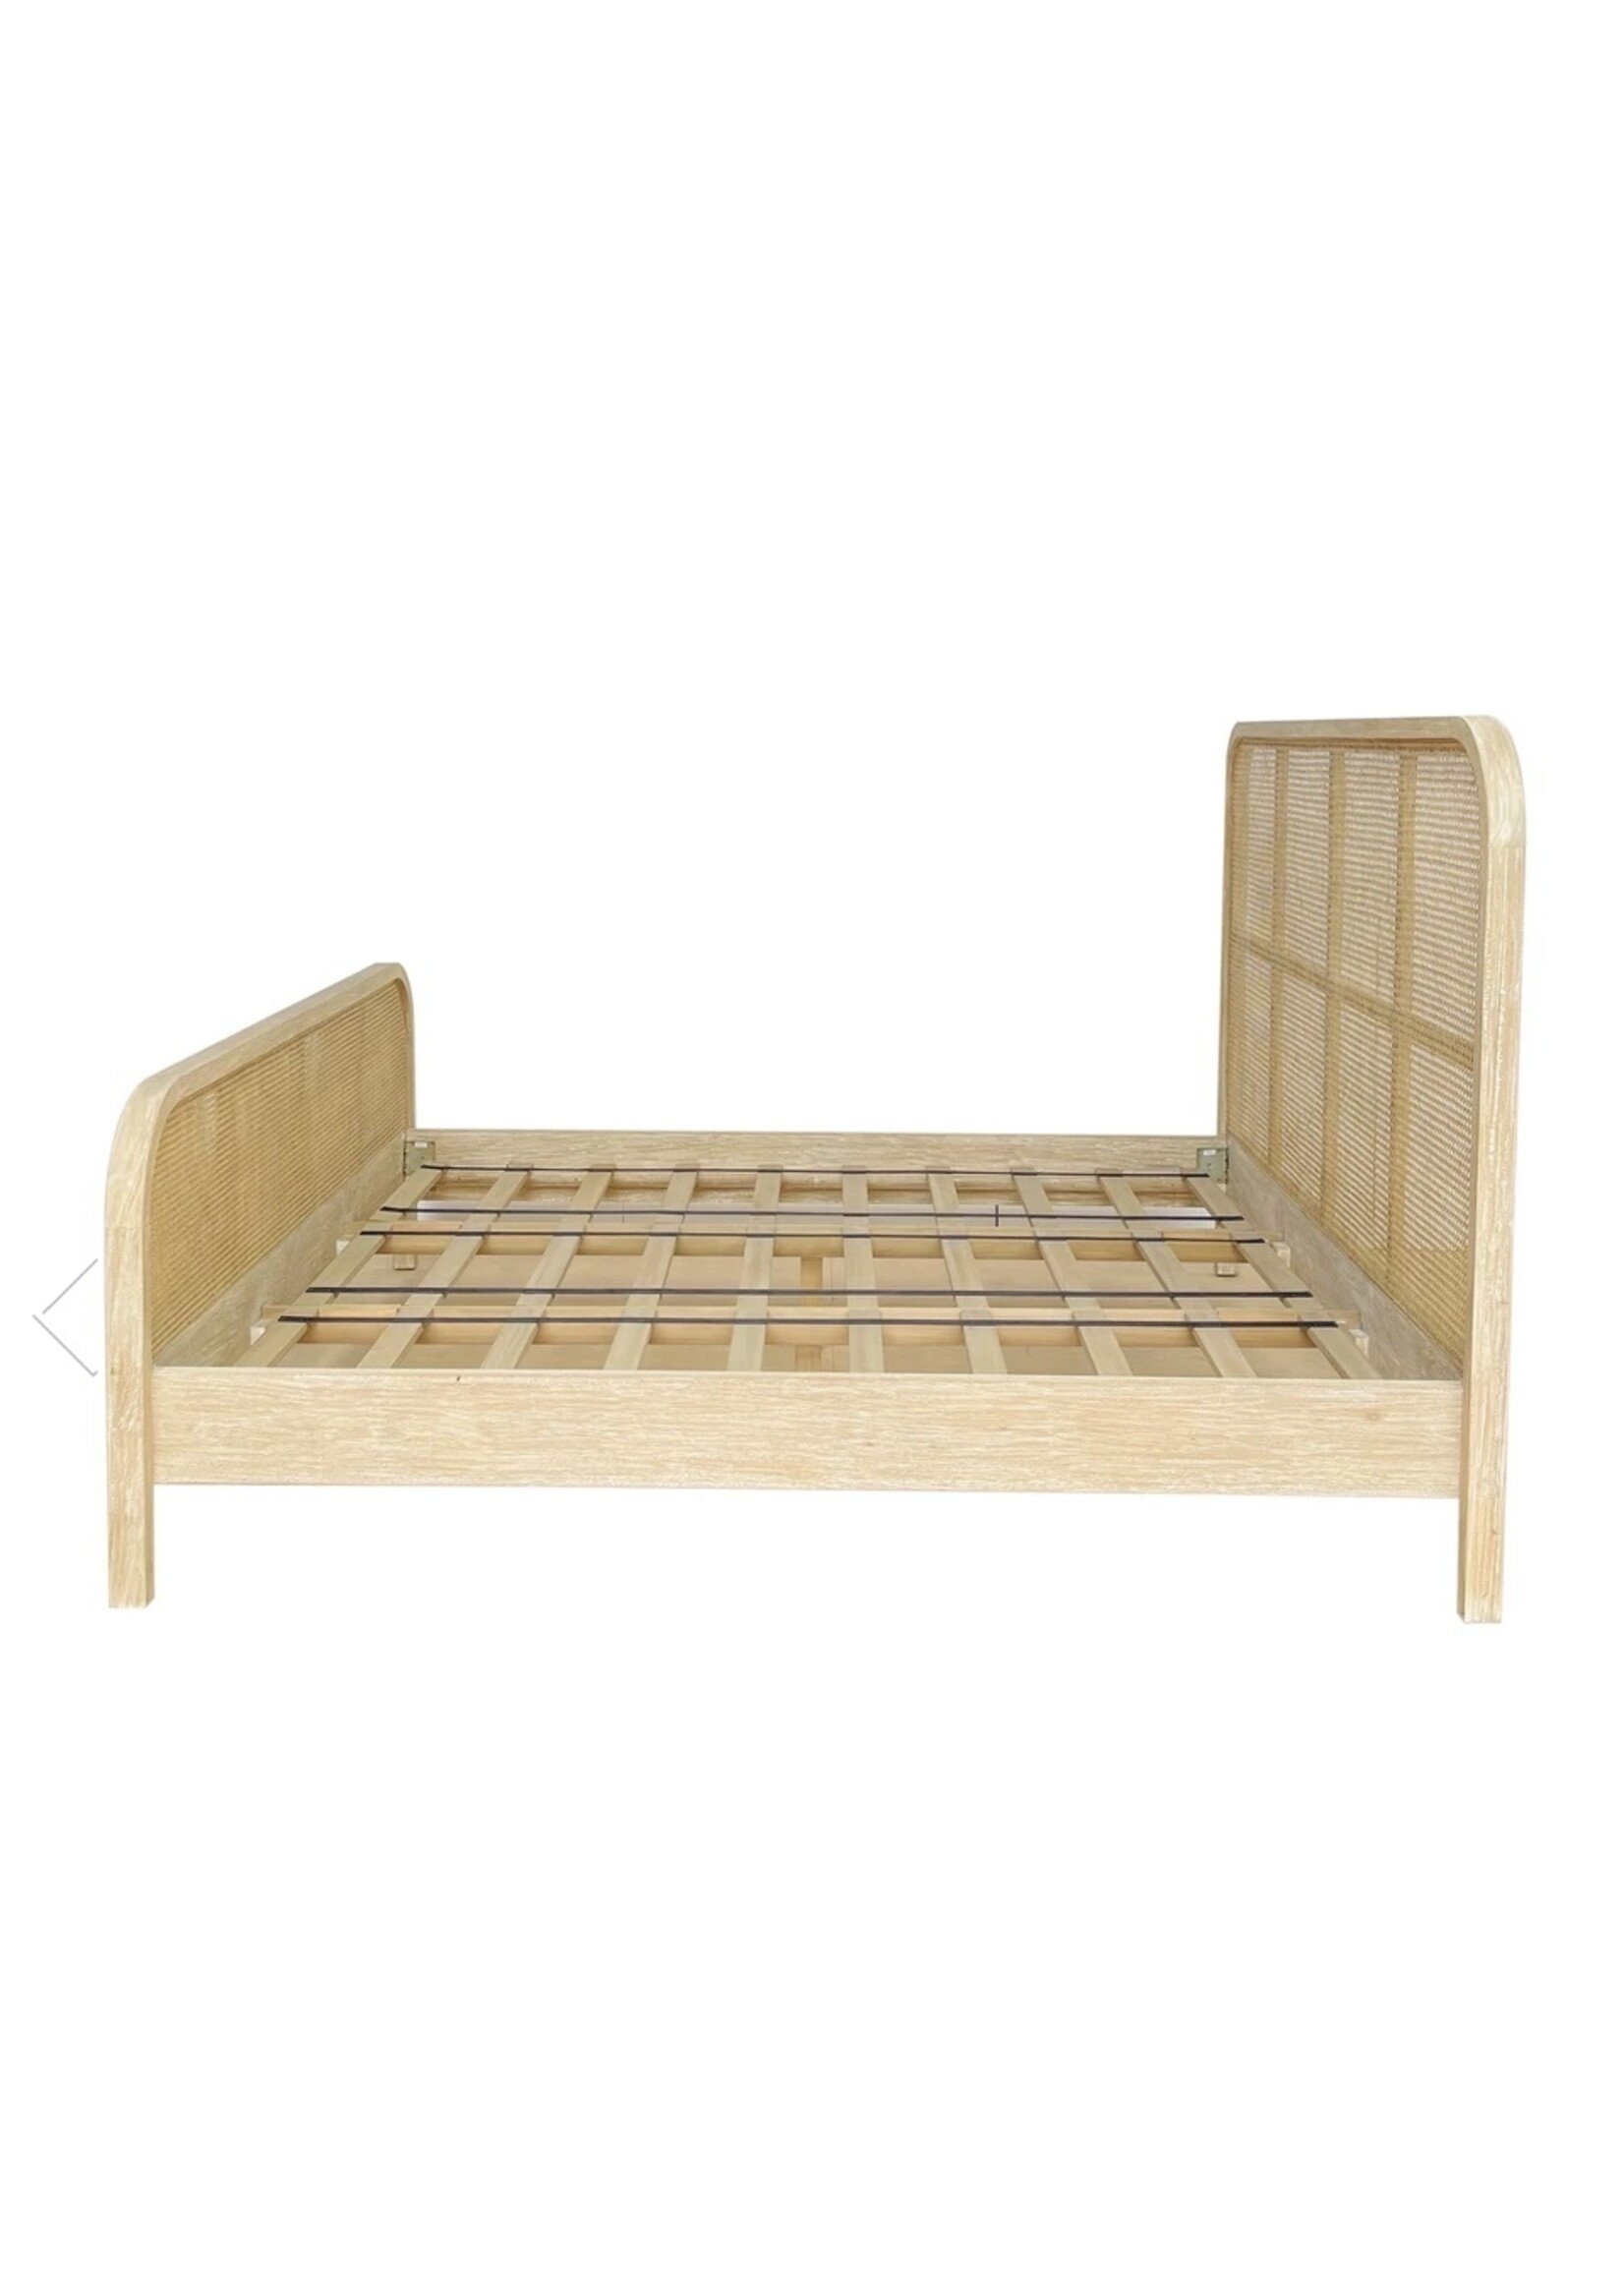 JOELLE KING BED NATURAL 75" W